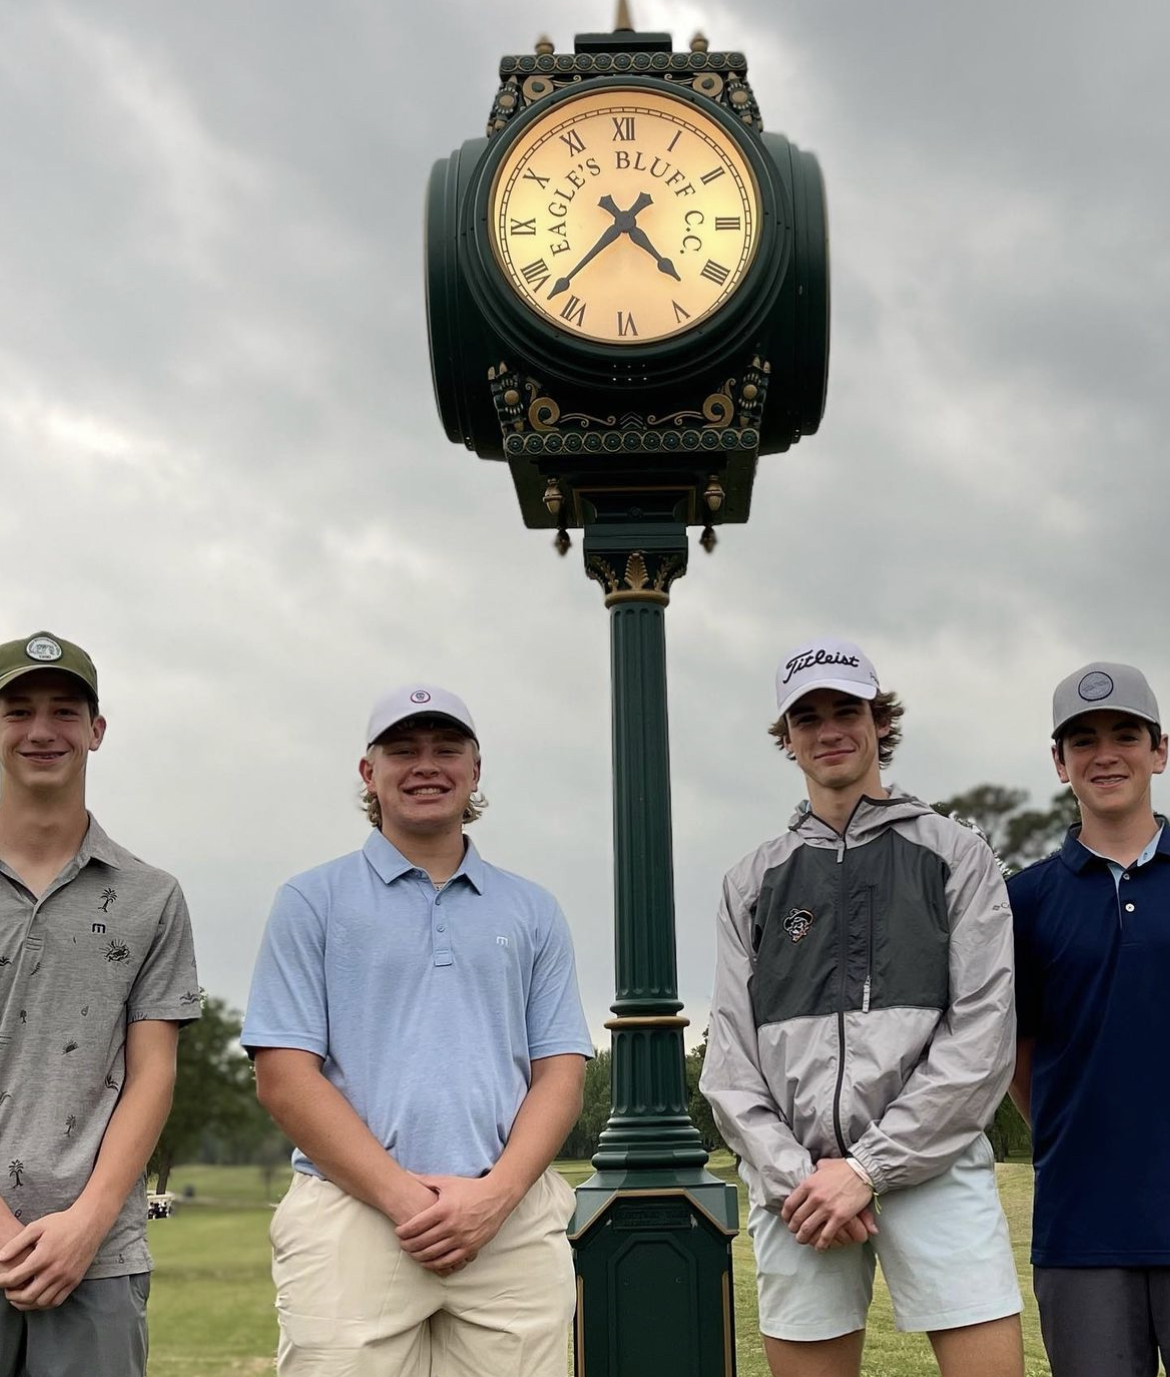 Mustang+Golf+Takes+On+The+Brook+Hill+Invitational